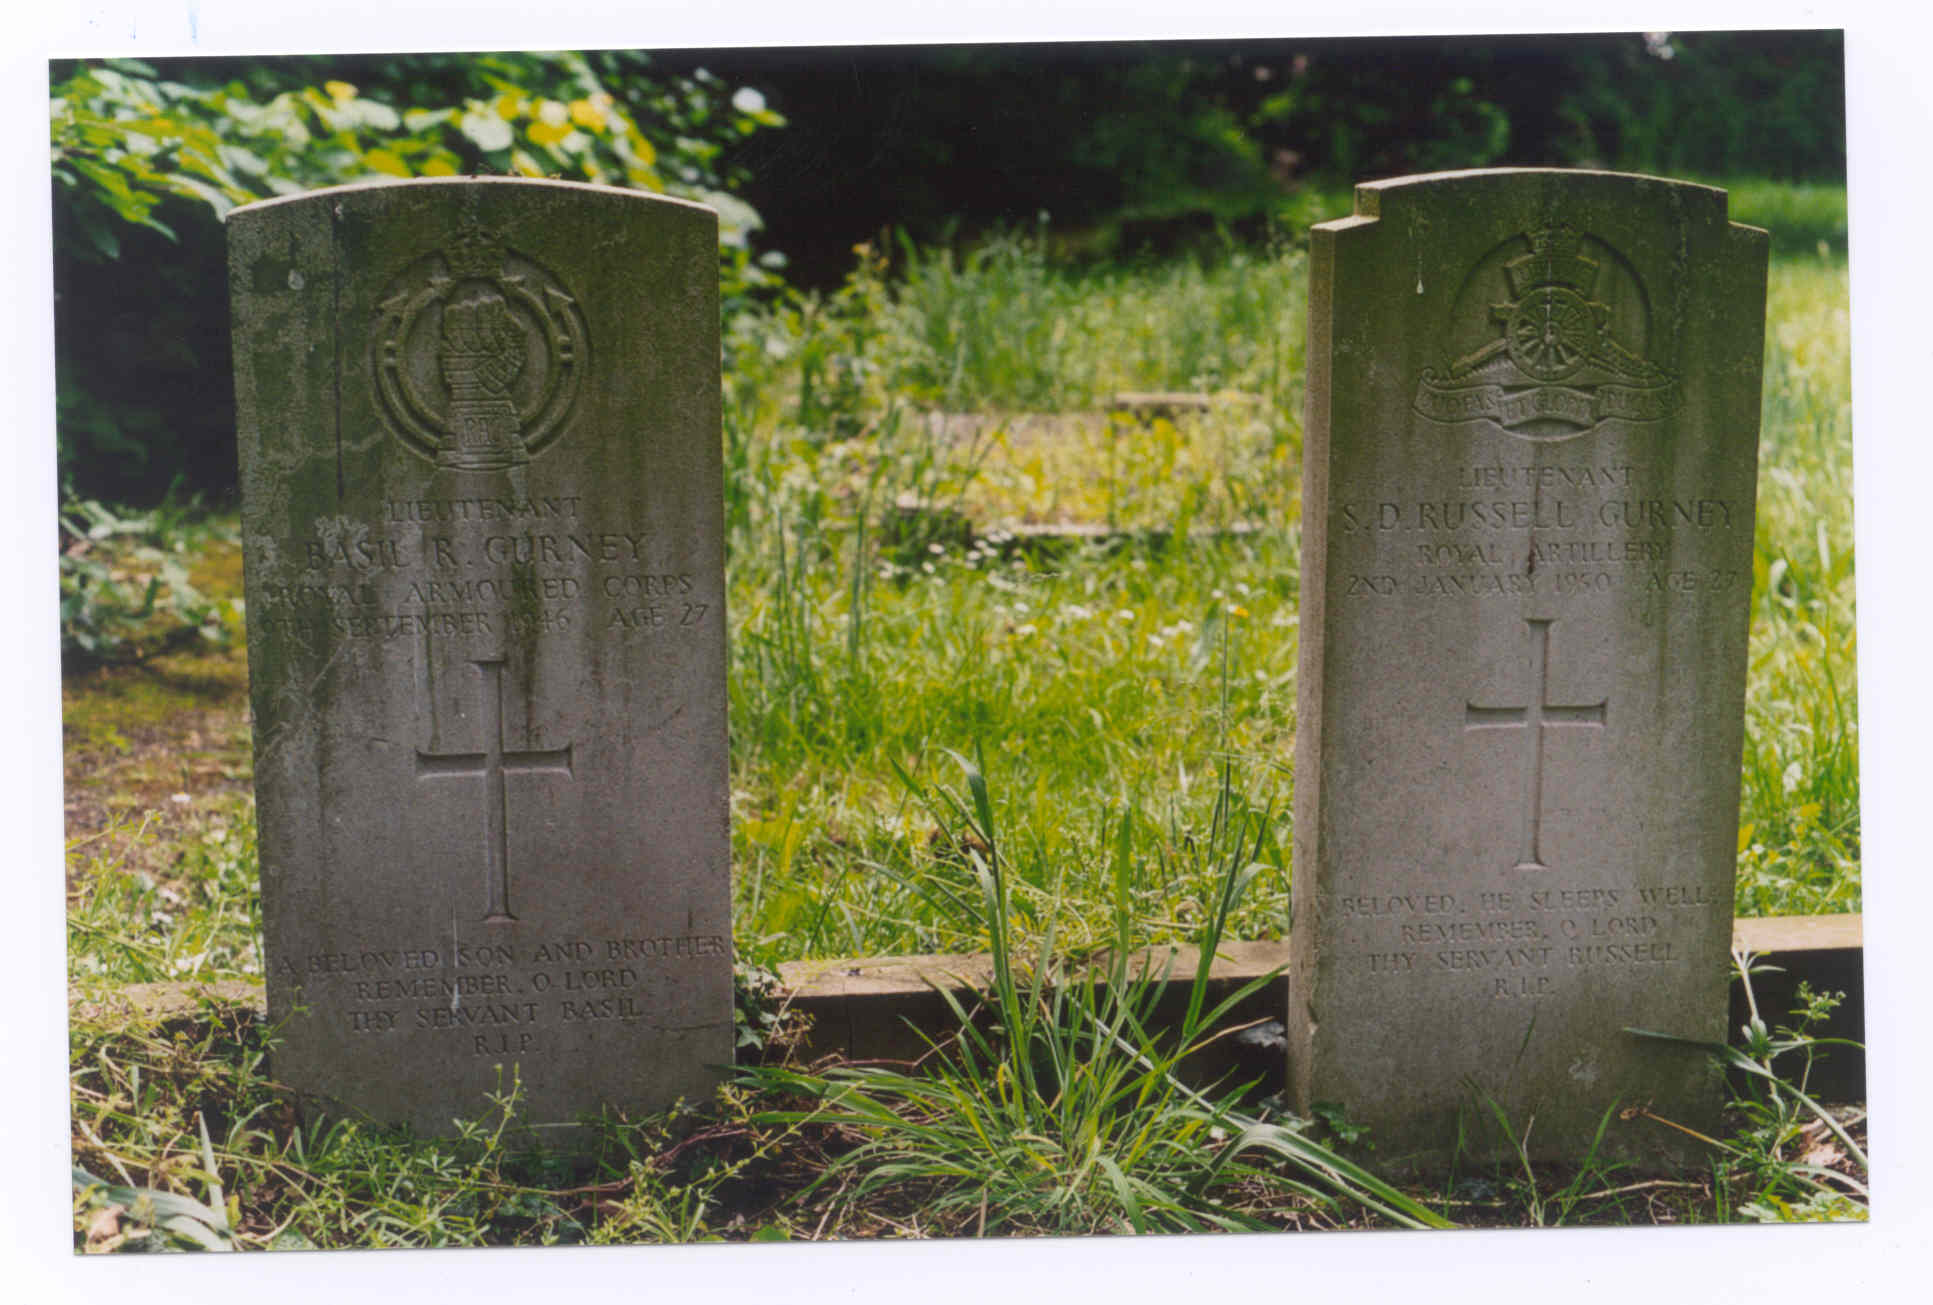 The graves of Basil and Stephen Russell Gurney in St. James on the Corner Cemetery, Wetherby.